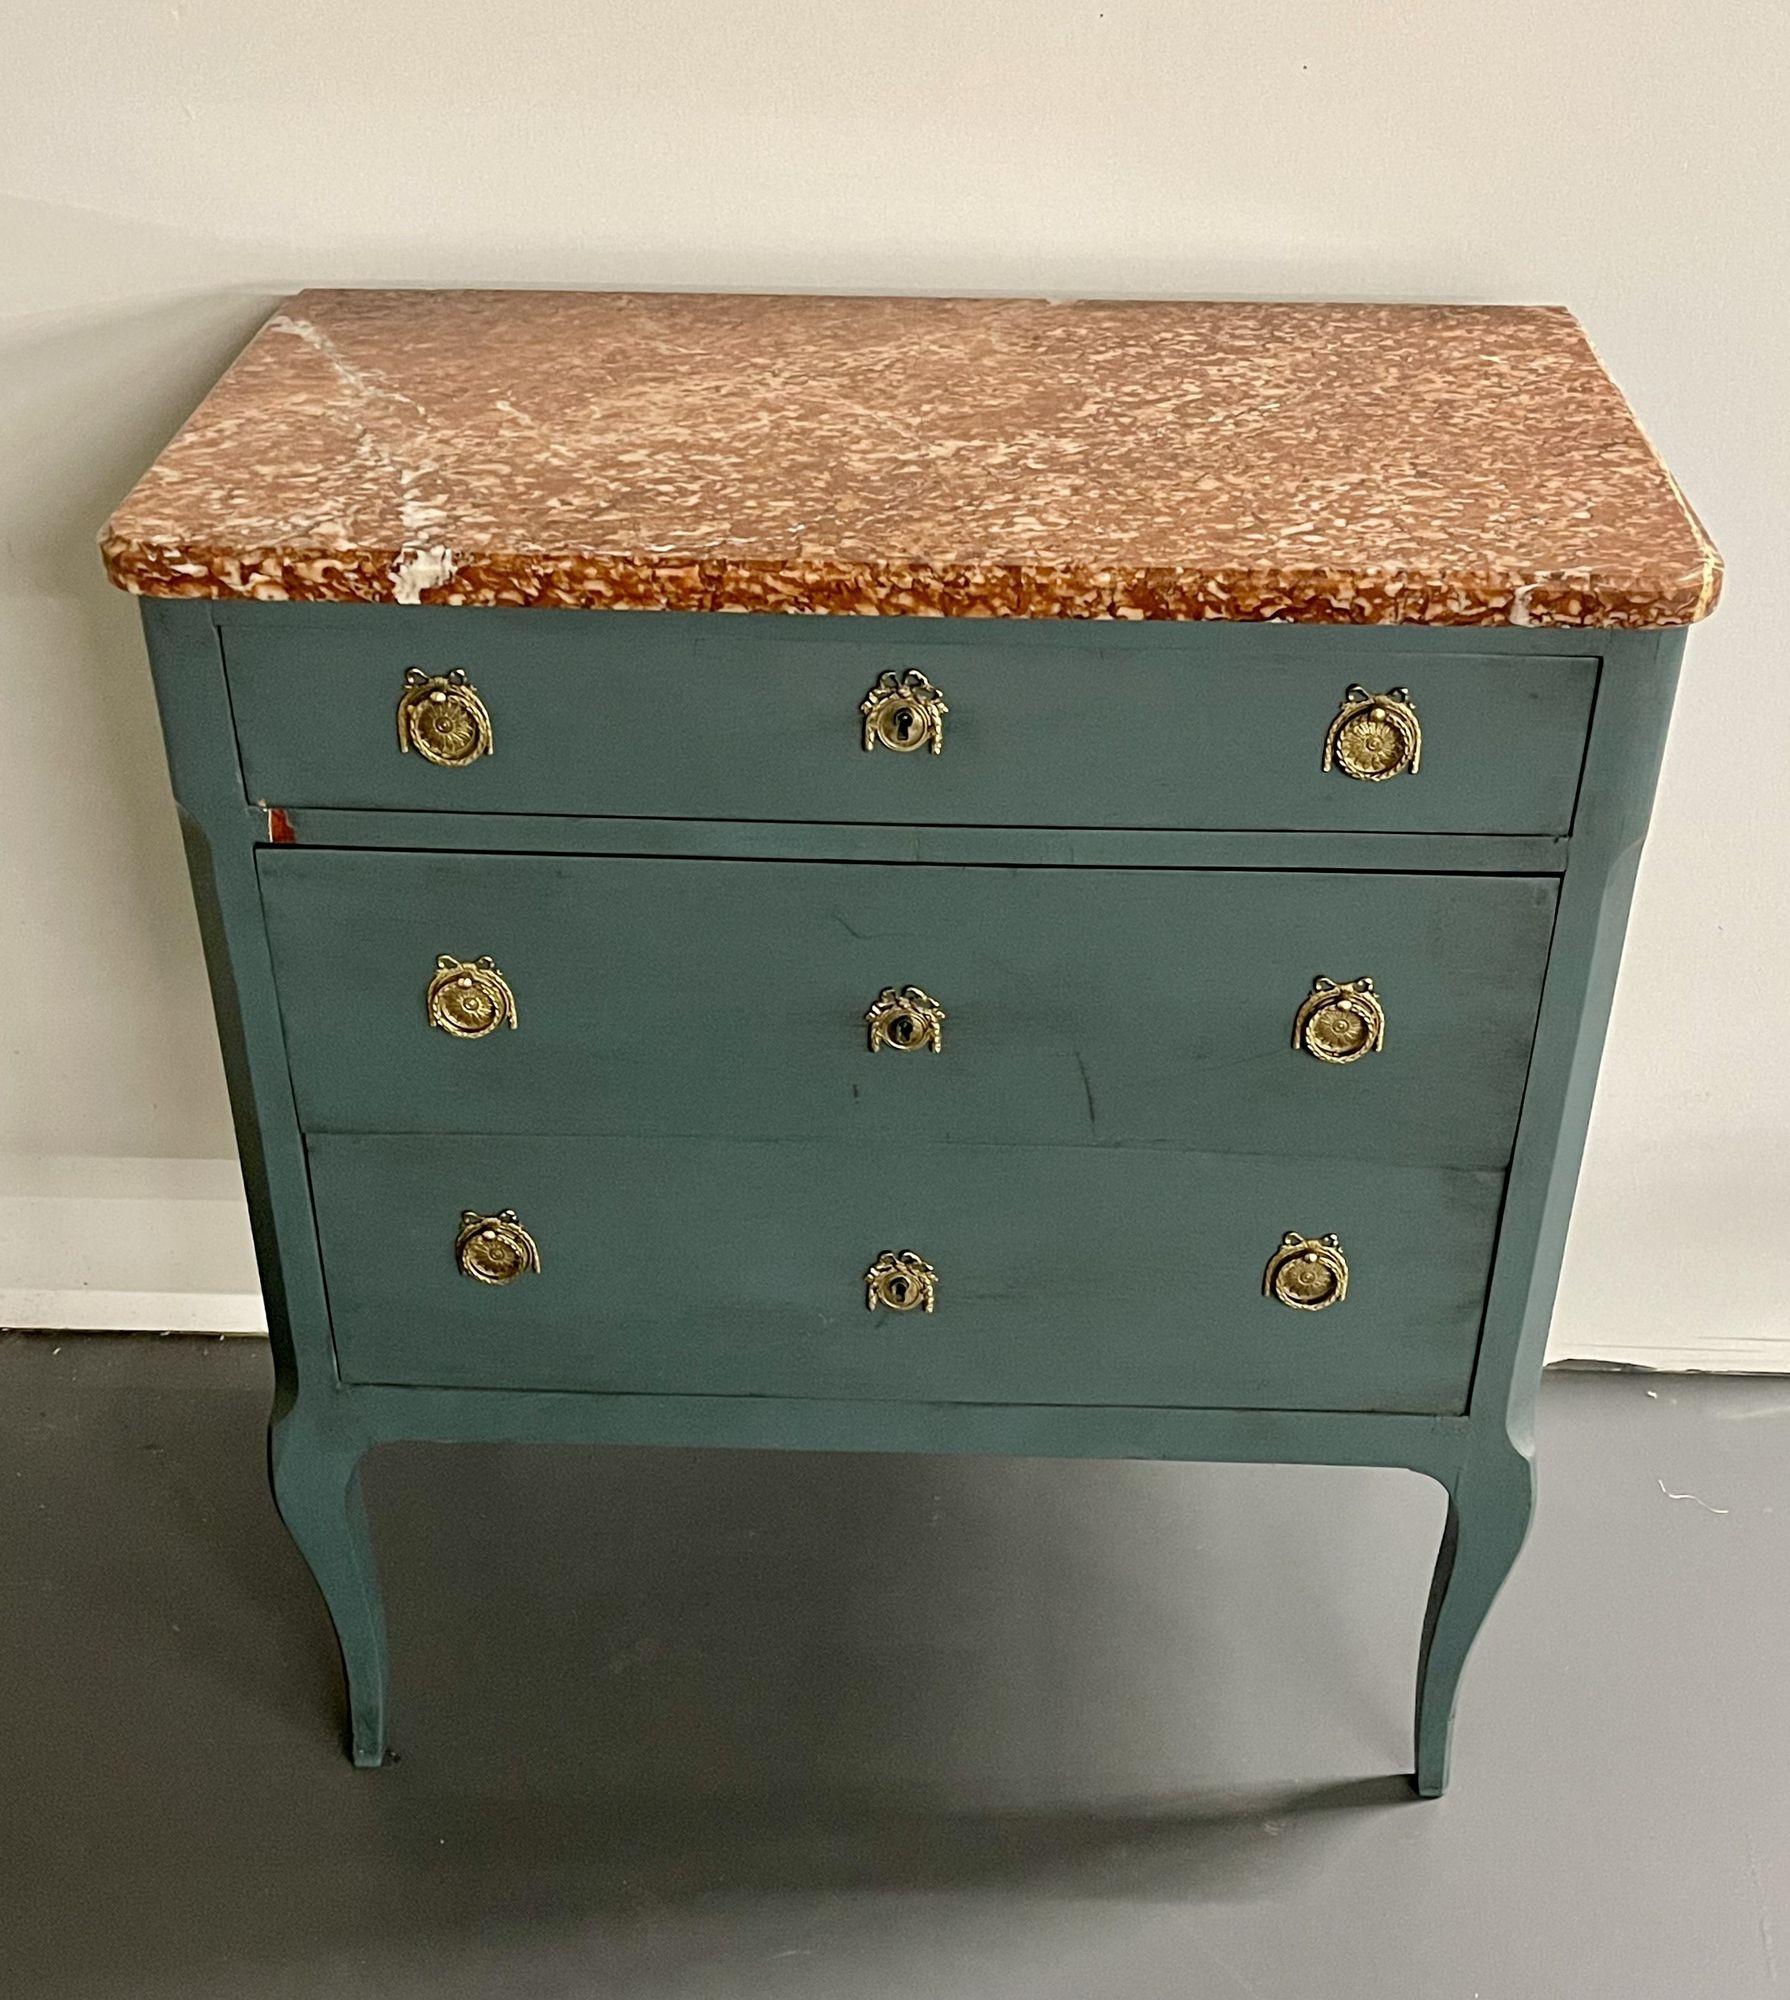 Gustavian Paint Decorated Swedish chest / dresser marble top, brass accent
 
Single gustavian chest manufactured in Sweden with later blue paint decoration, red marble top with white veining, and sitting on curved, organic form legs. 
 
Ihxx.